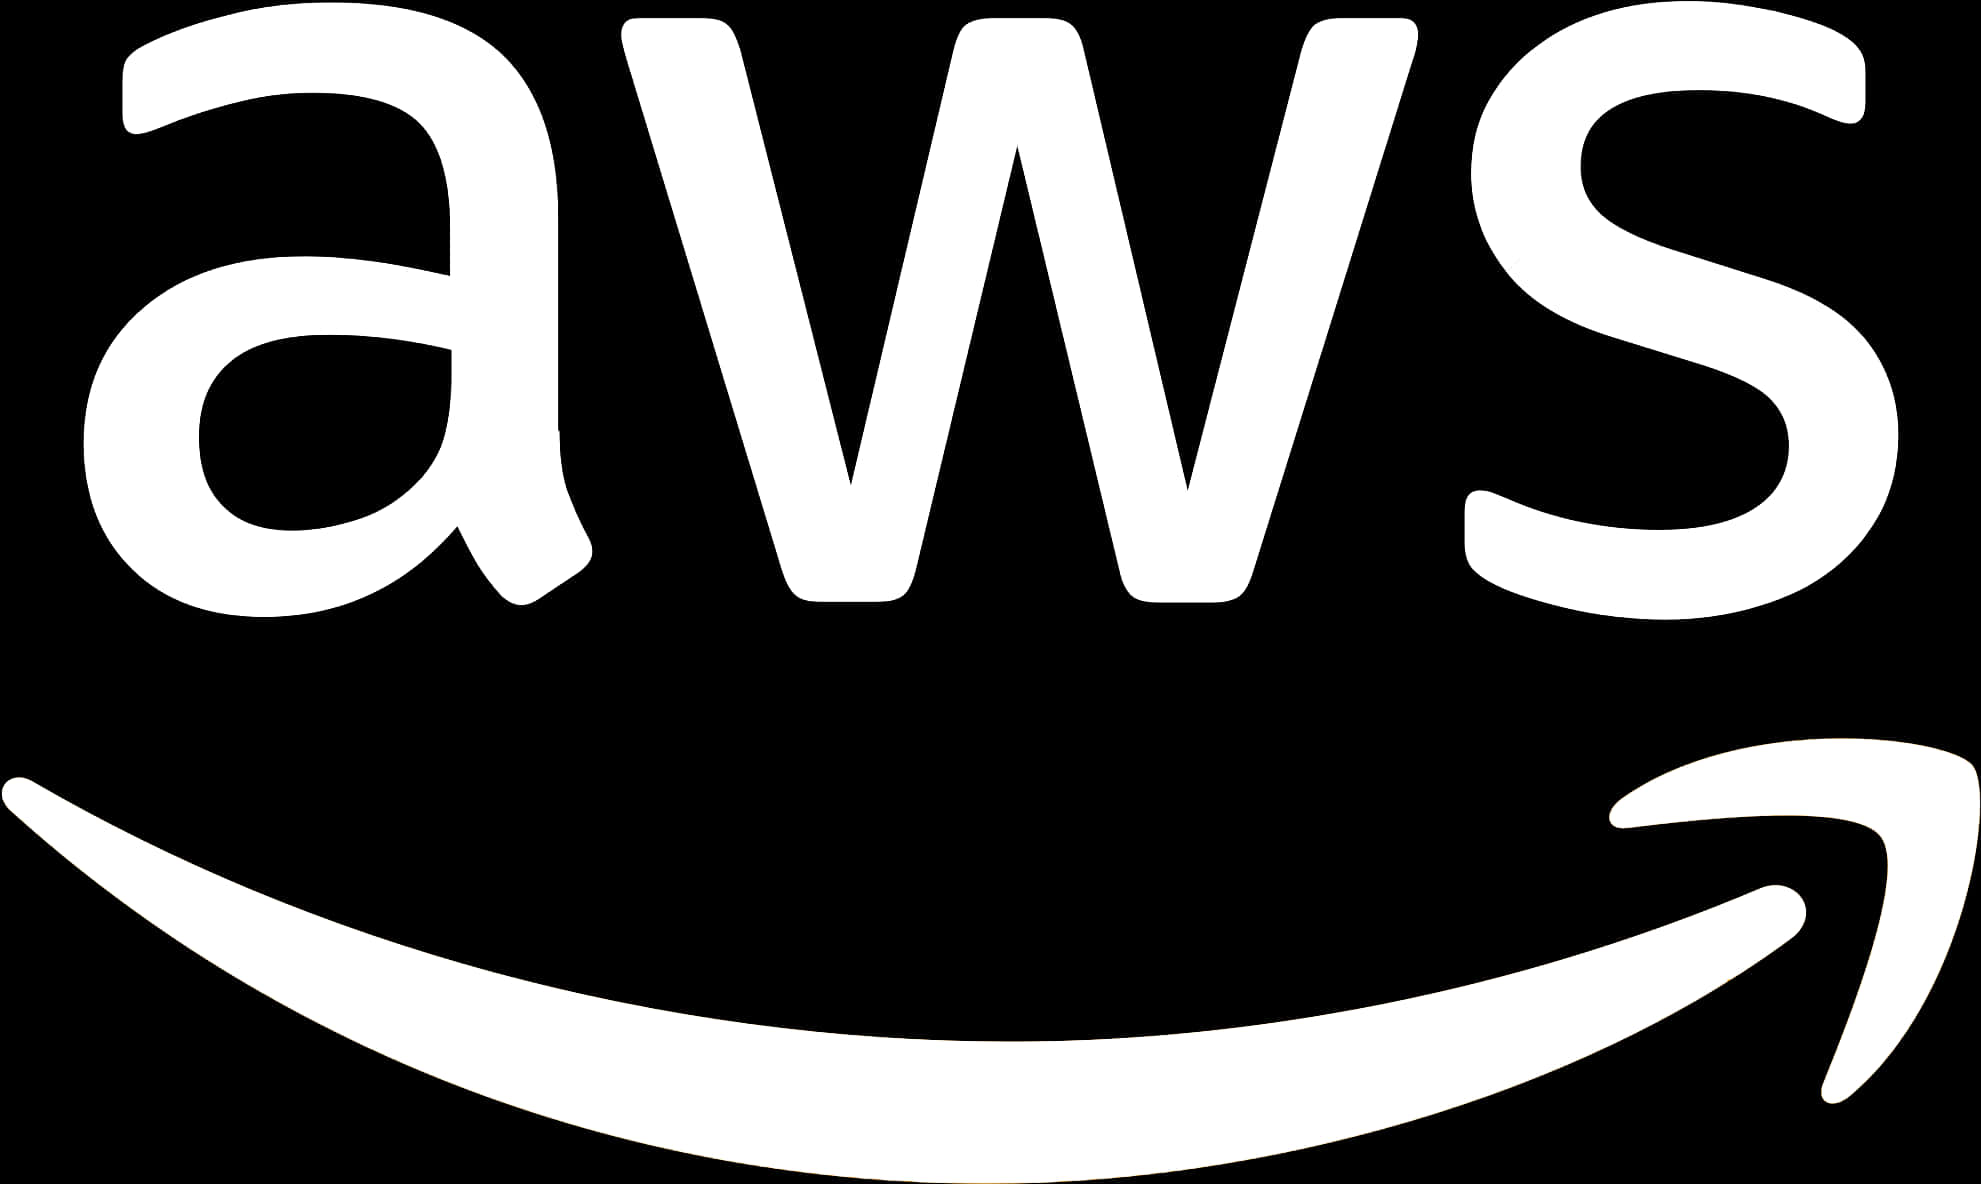 A W S Logo Blackand White PNG image